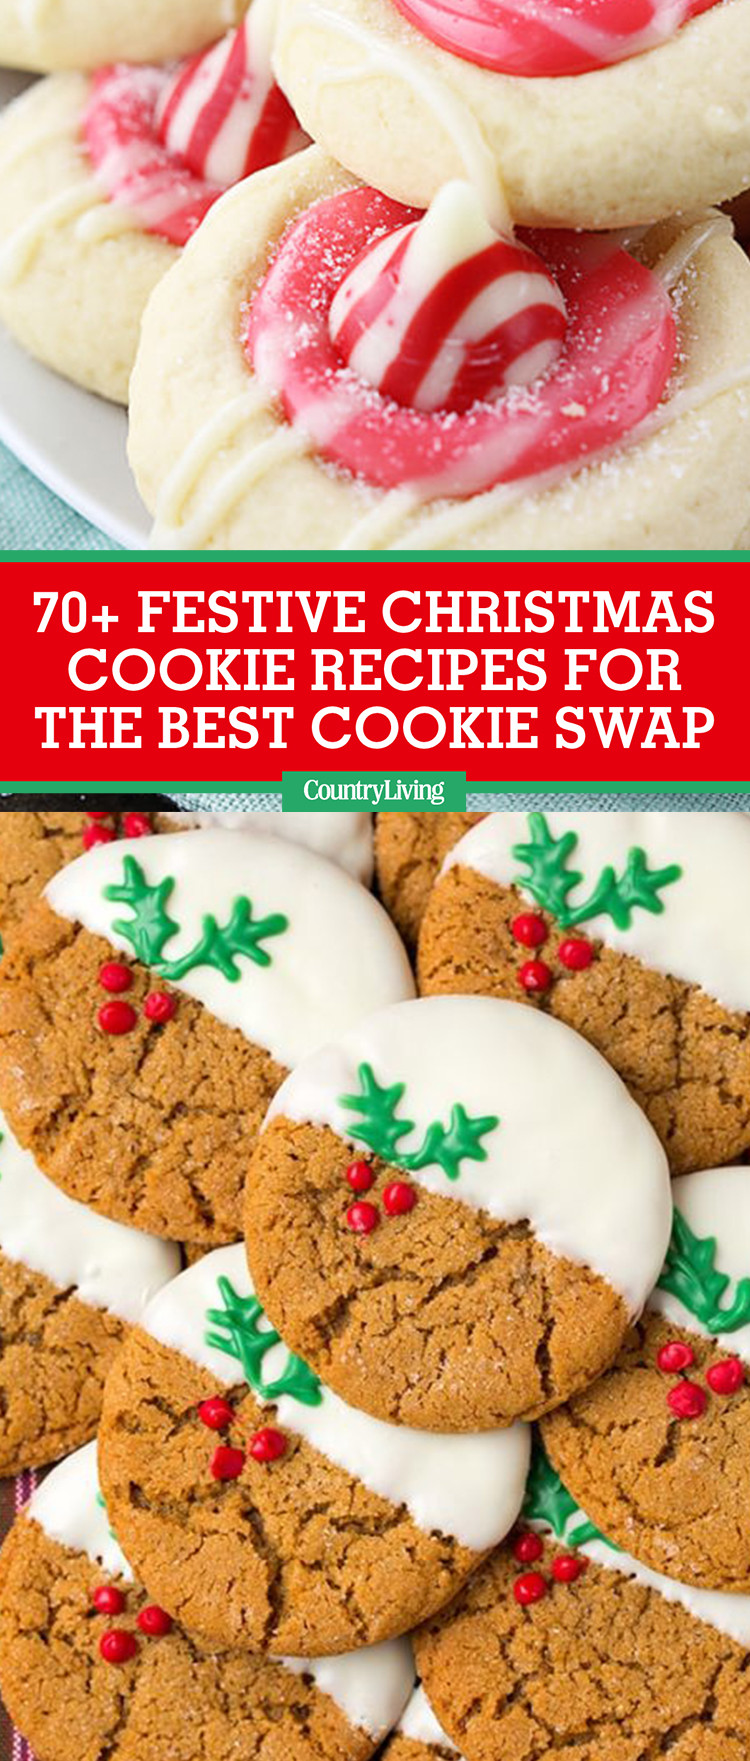 Fun Christmas Baking Ideas
 70 Best Christmas Cookie Recipes 2017 Easy Ideas for